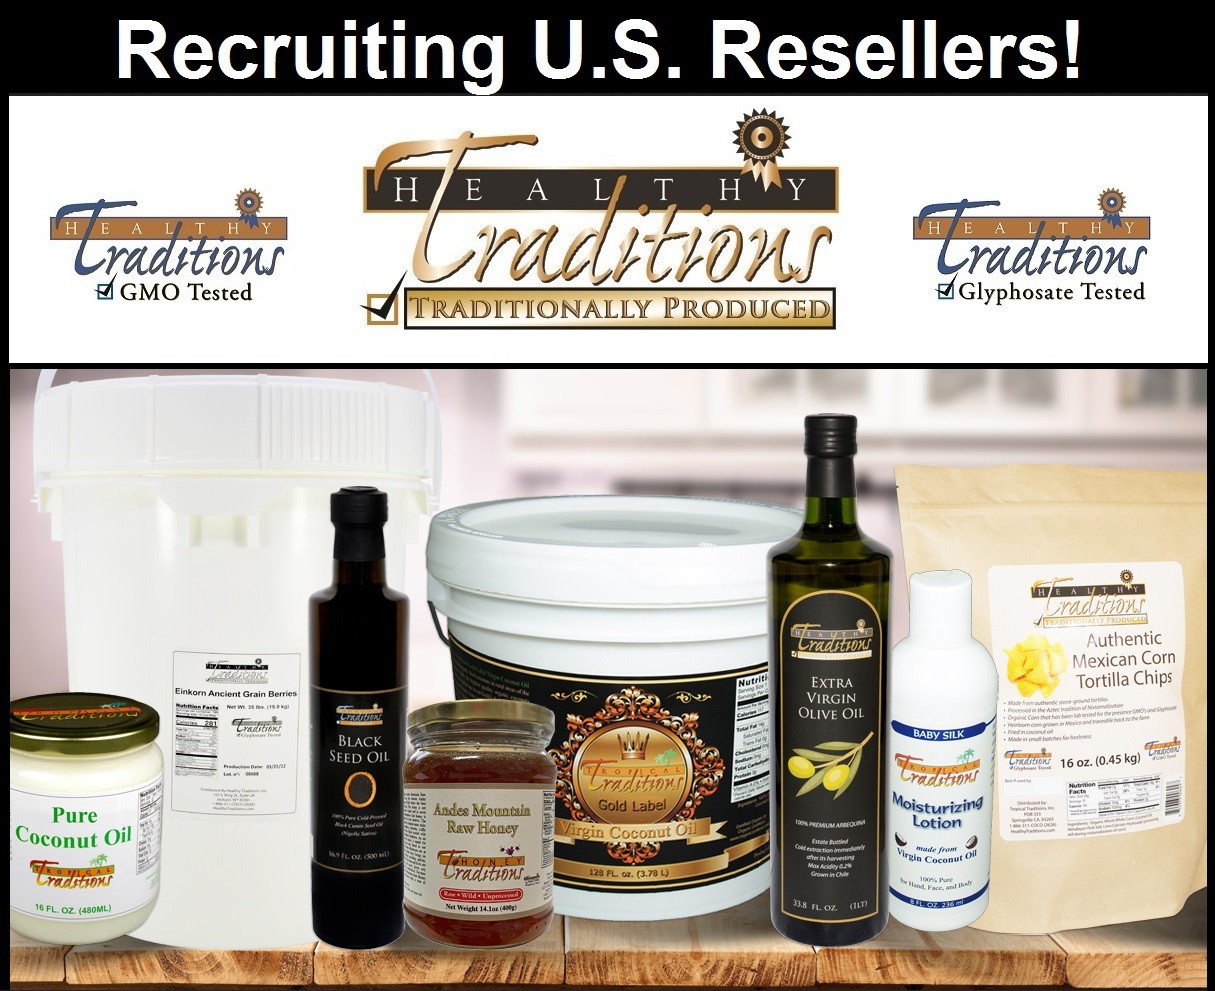 Healthy Traditions Recruiting Resellers 1